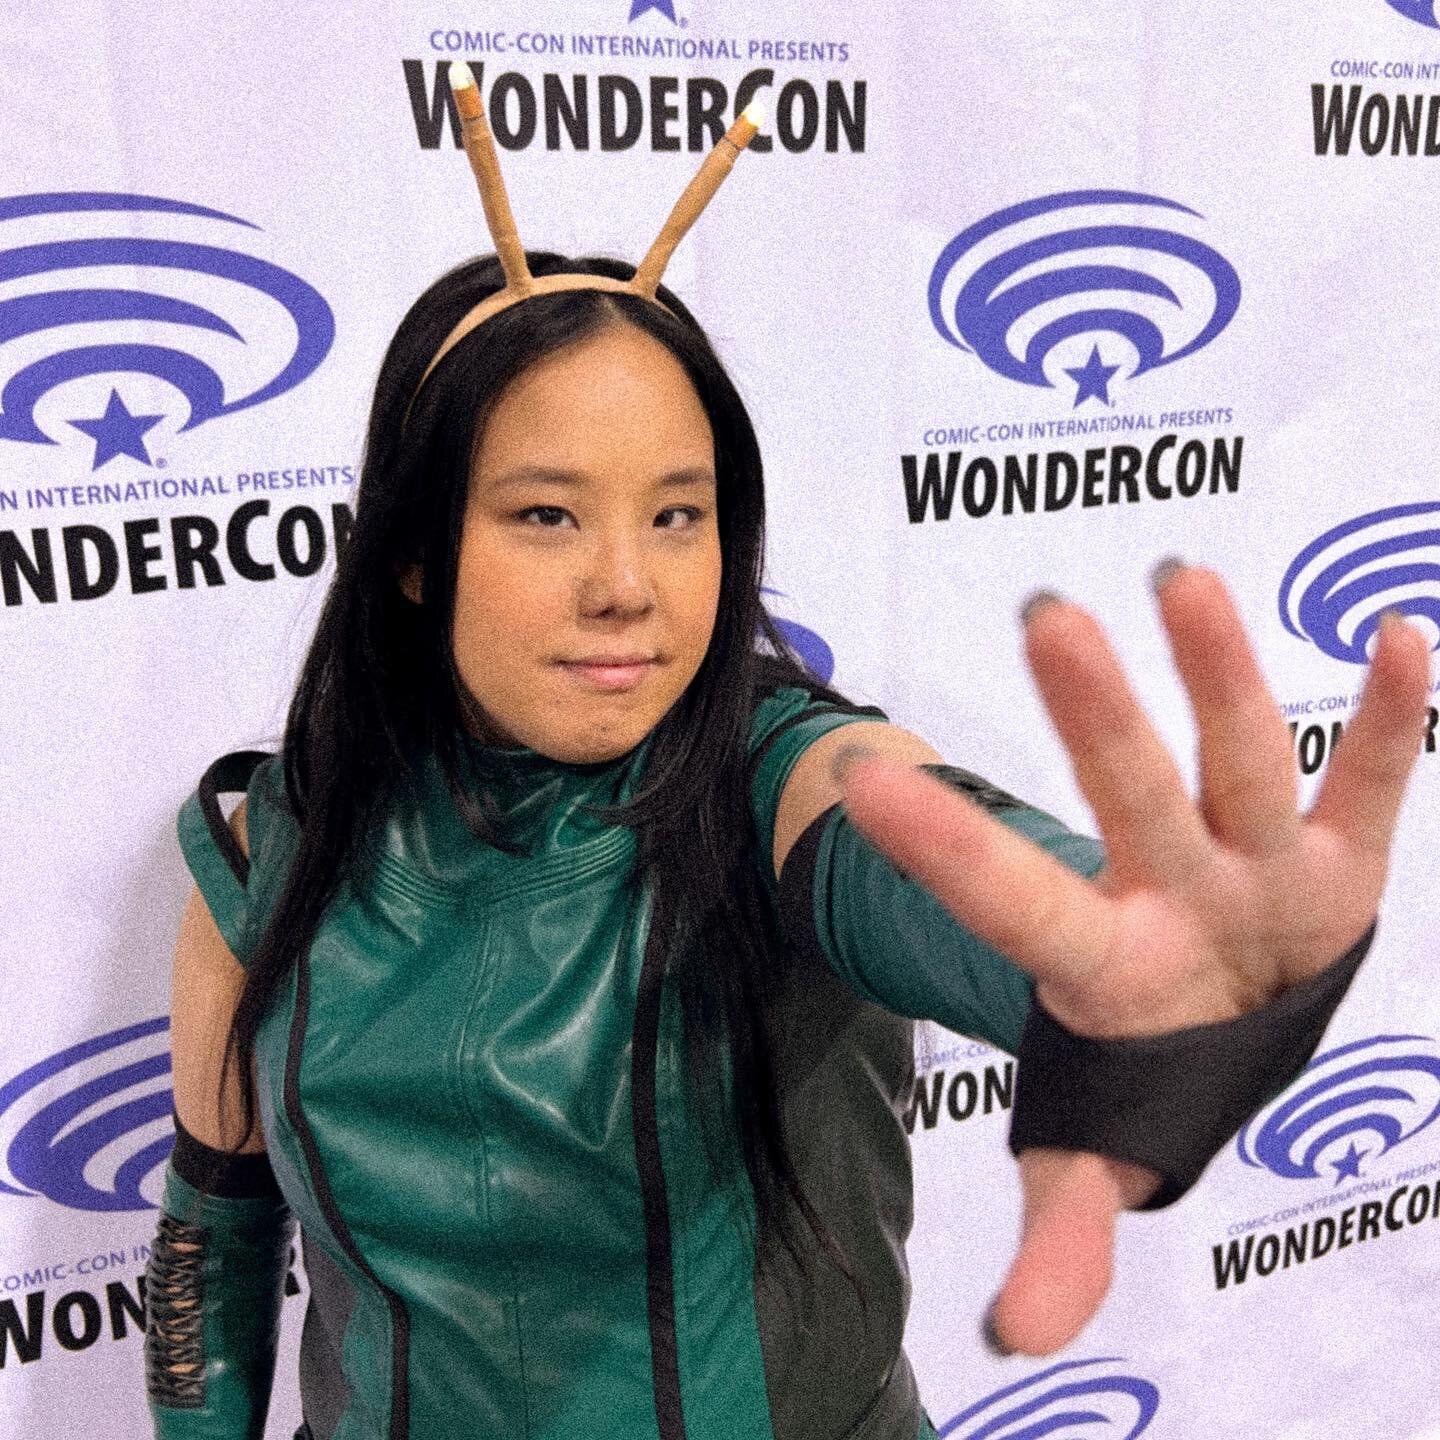 Wondercon &lsquo;23! It&rsquo;s good to be back to my first con since Covid!⁣ I was so excited to see raccacoonie!!!! 
⁣
#Wondercon #WonderCon23 #everythingeverwhereallatonce #mantis #guardiansofthegalaxy #starlord #disney #disneycosplay #cosplay